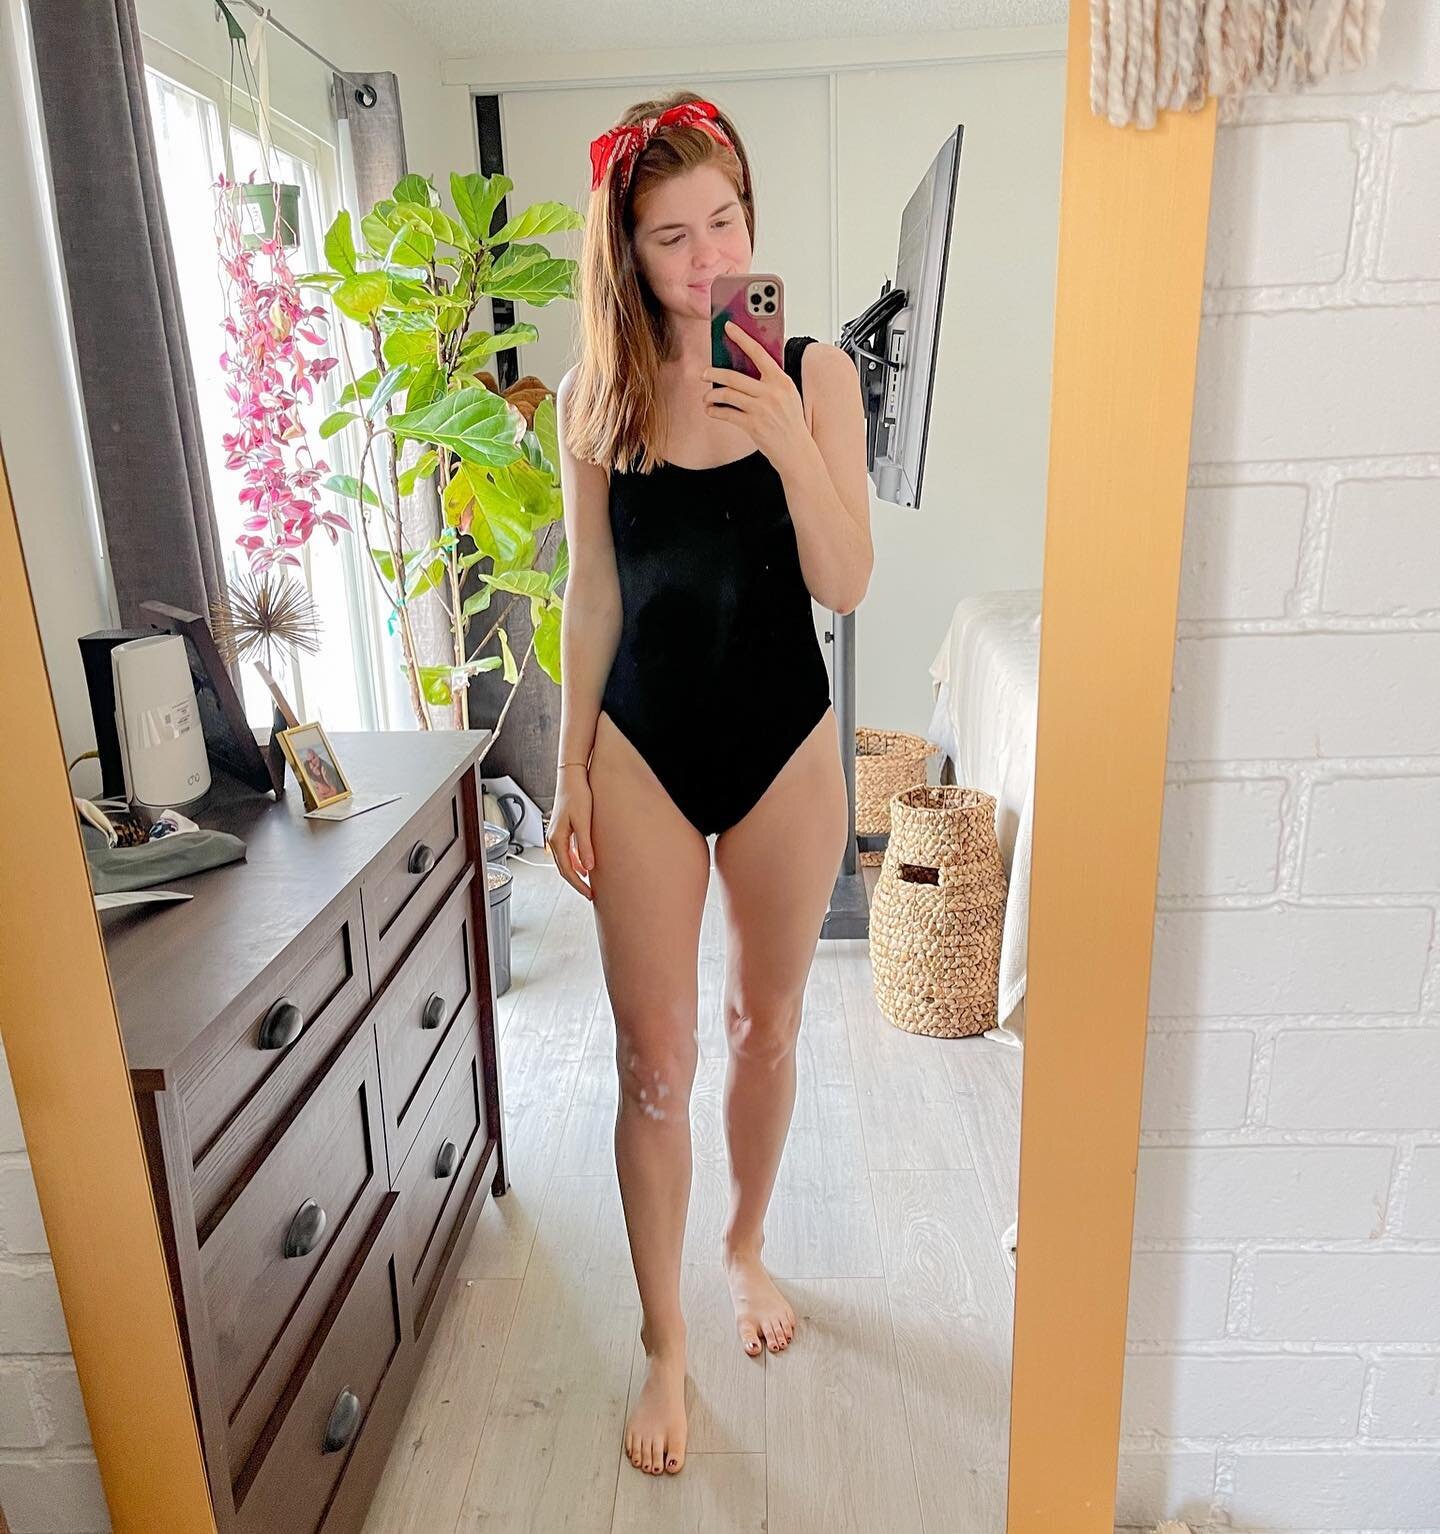 Just shared a hack over on stories to save you $15 on this swimsuit that is never on sale and is rarely in stock - ya welcome and happy Thursday!
.
I reviewed @hunza.g swim here: https://elementoffashion.com/blogfeed/hunza-g-swimwear-review and shar